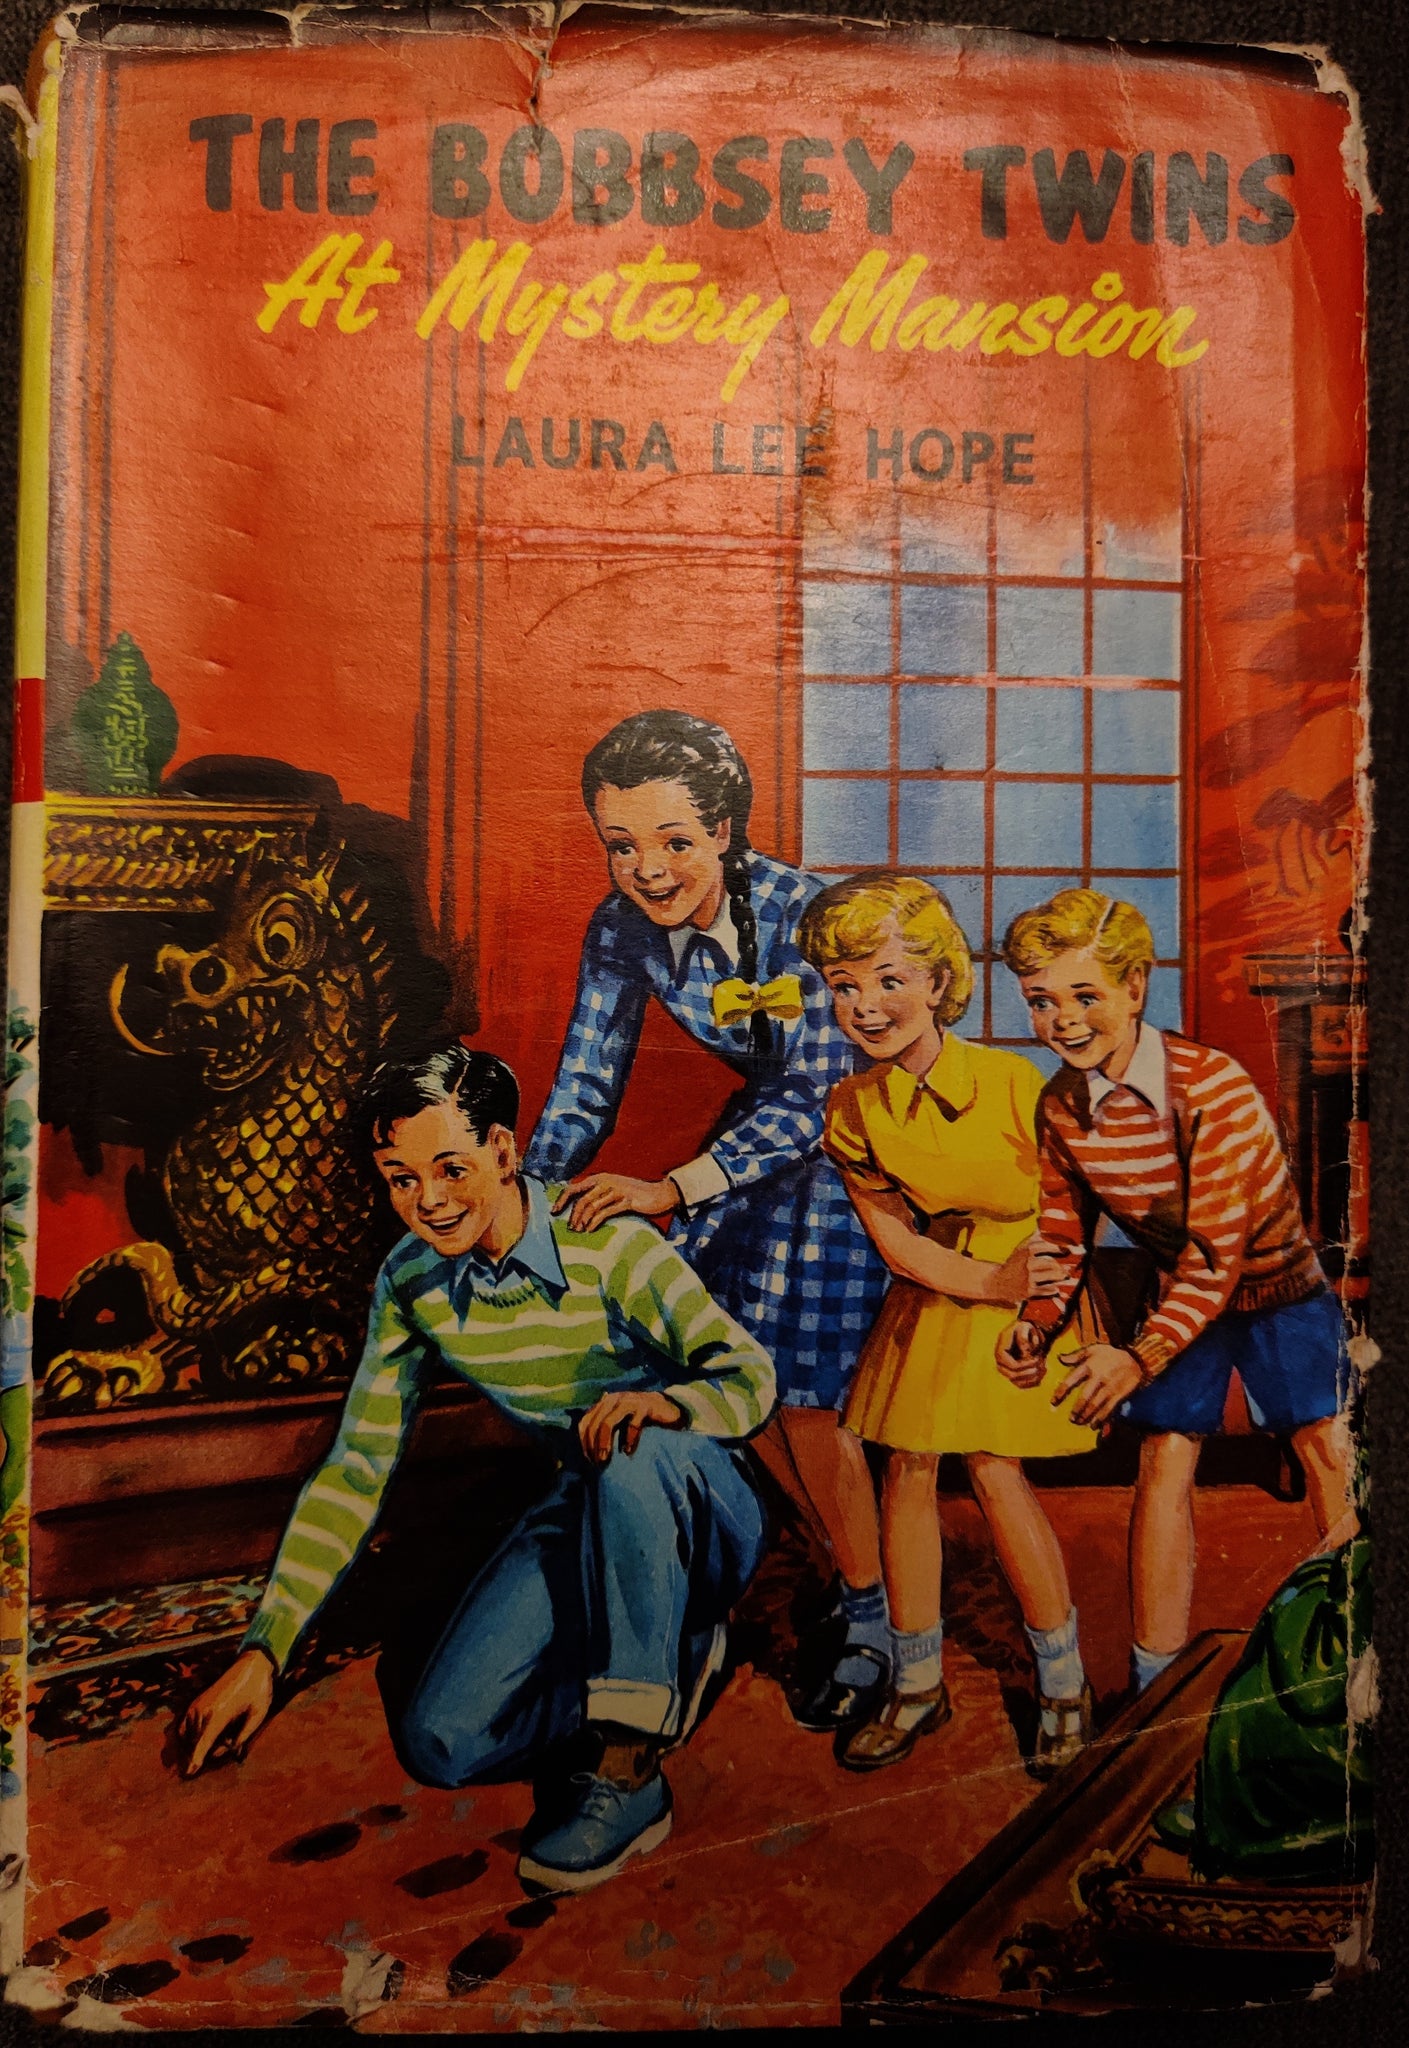 The Bobbsey Twins At Mystery Mansion by Laura Lee Hope